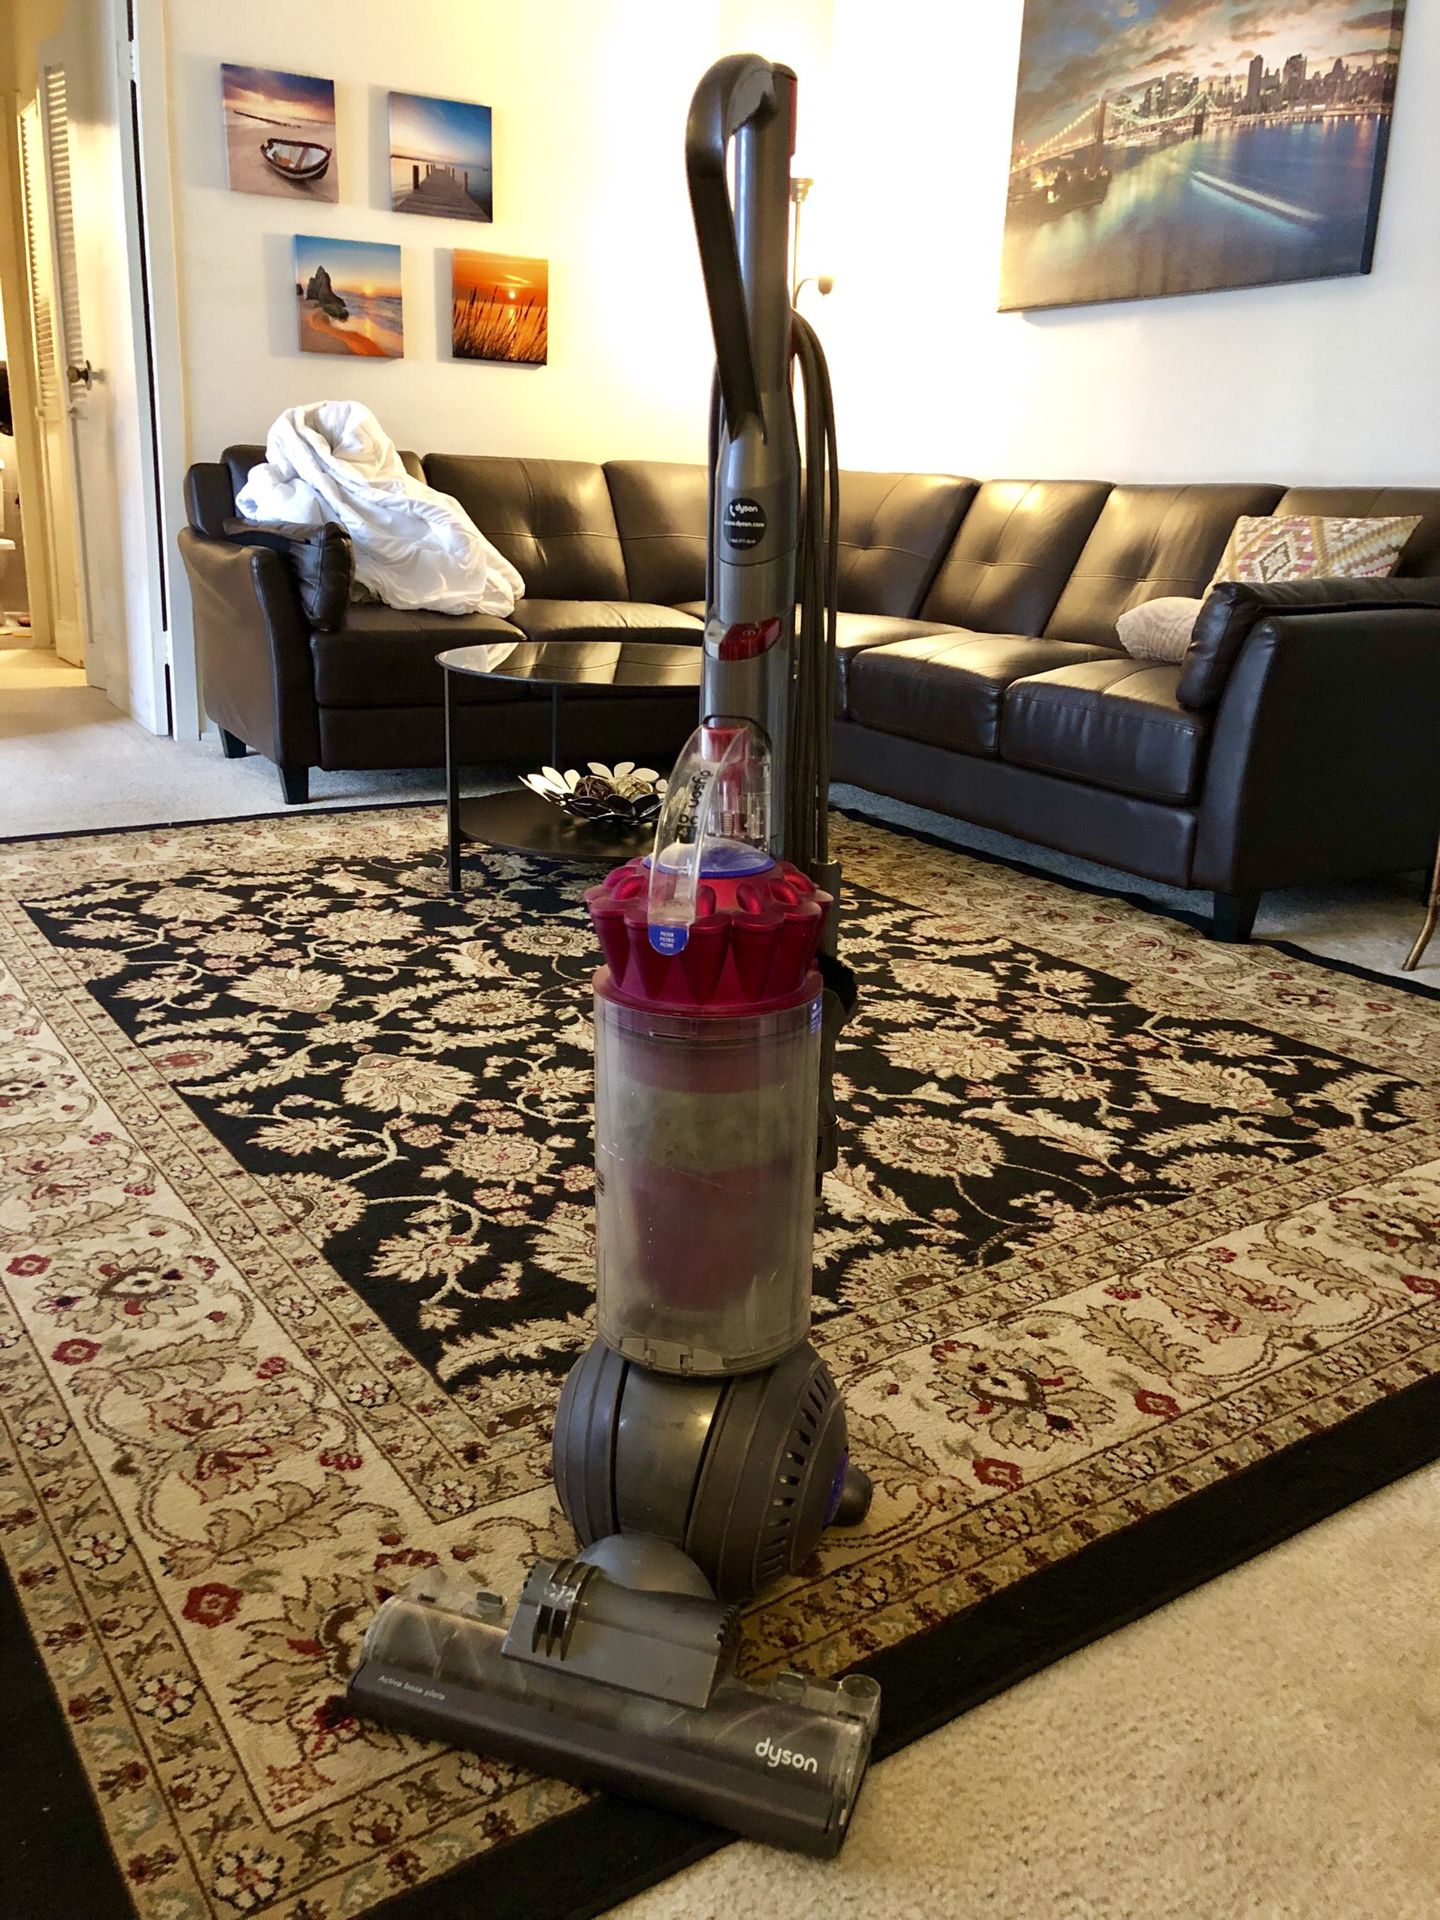 Dyson DC41 Works perfectly + set of very expensive nozzles